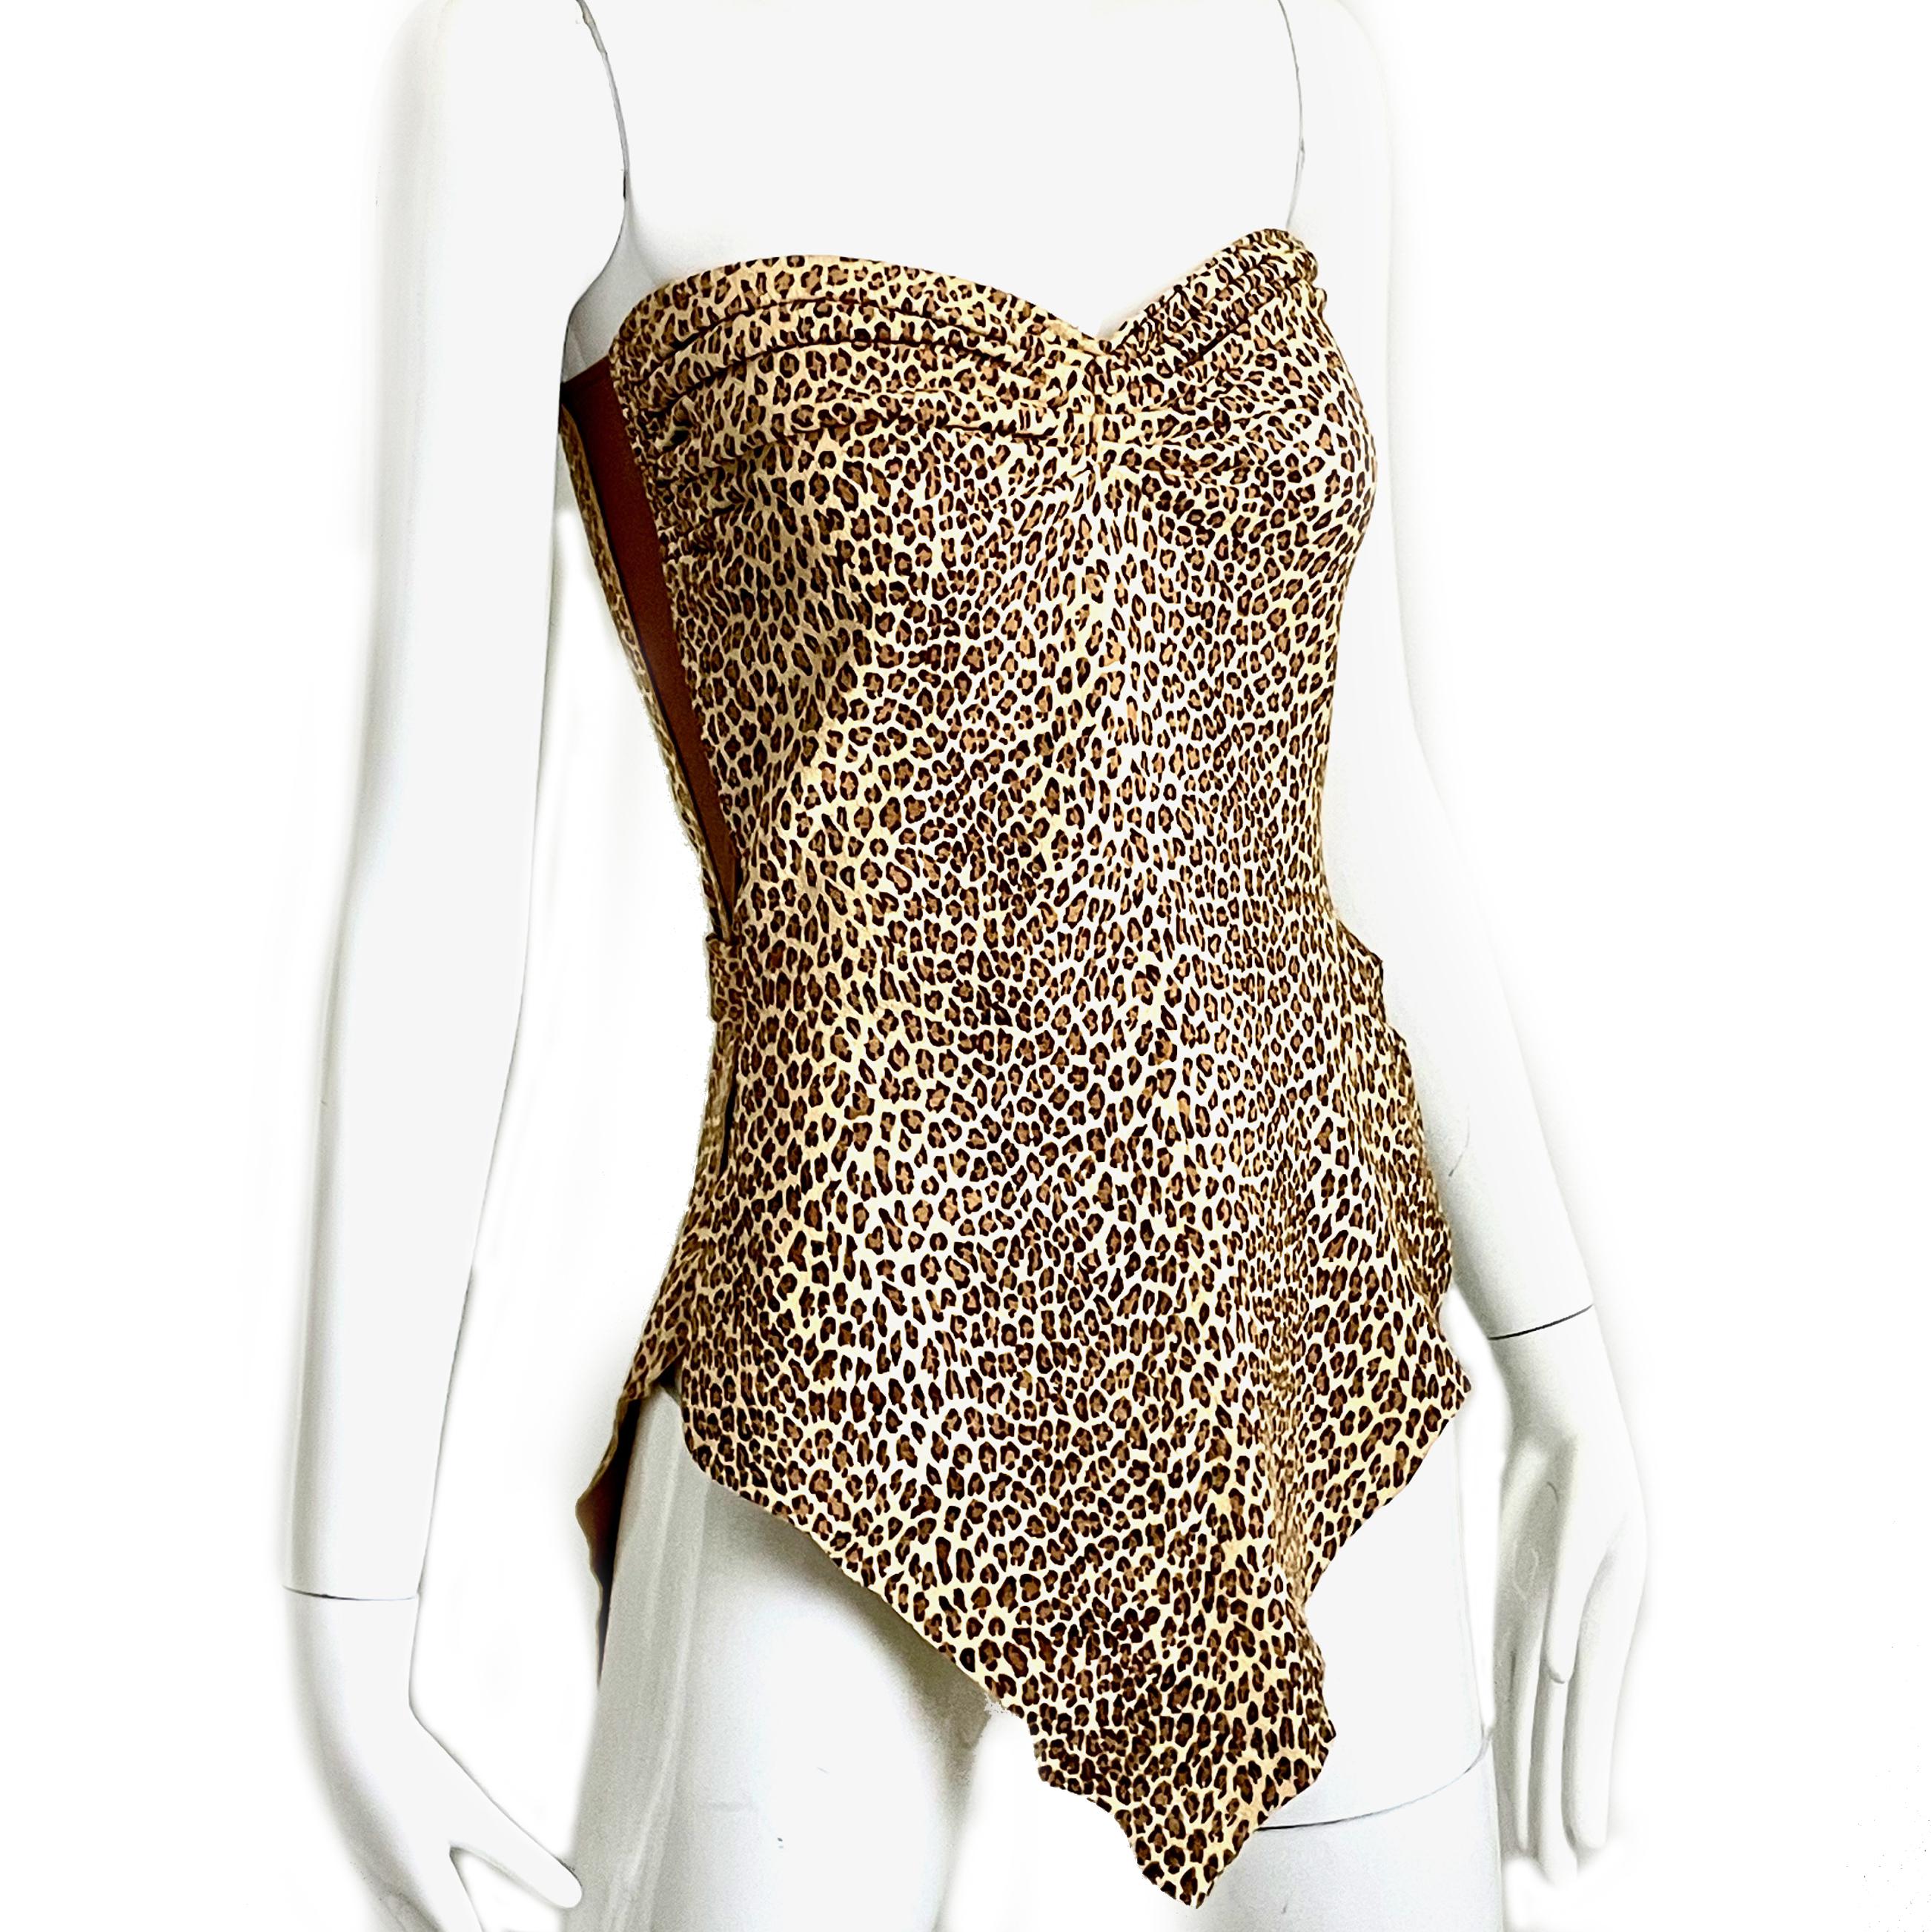 Vintage Norma Kamali OMO Halter Top with Wrap Ties Leopard Print Leather HTF 3